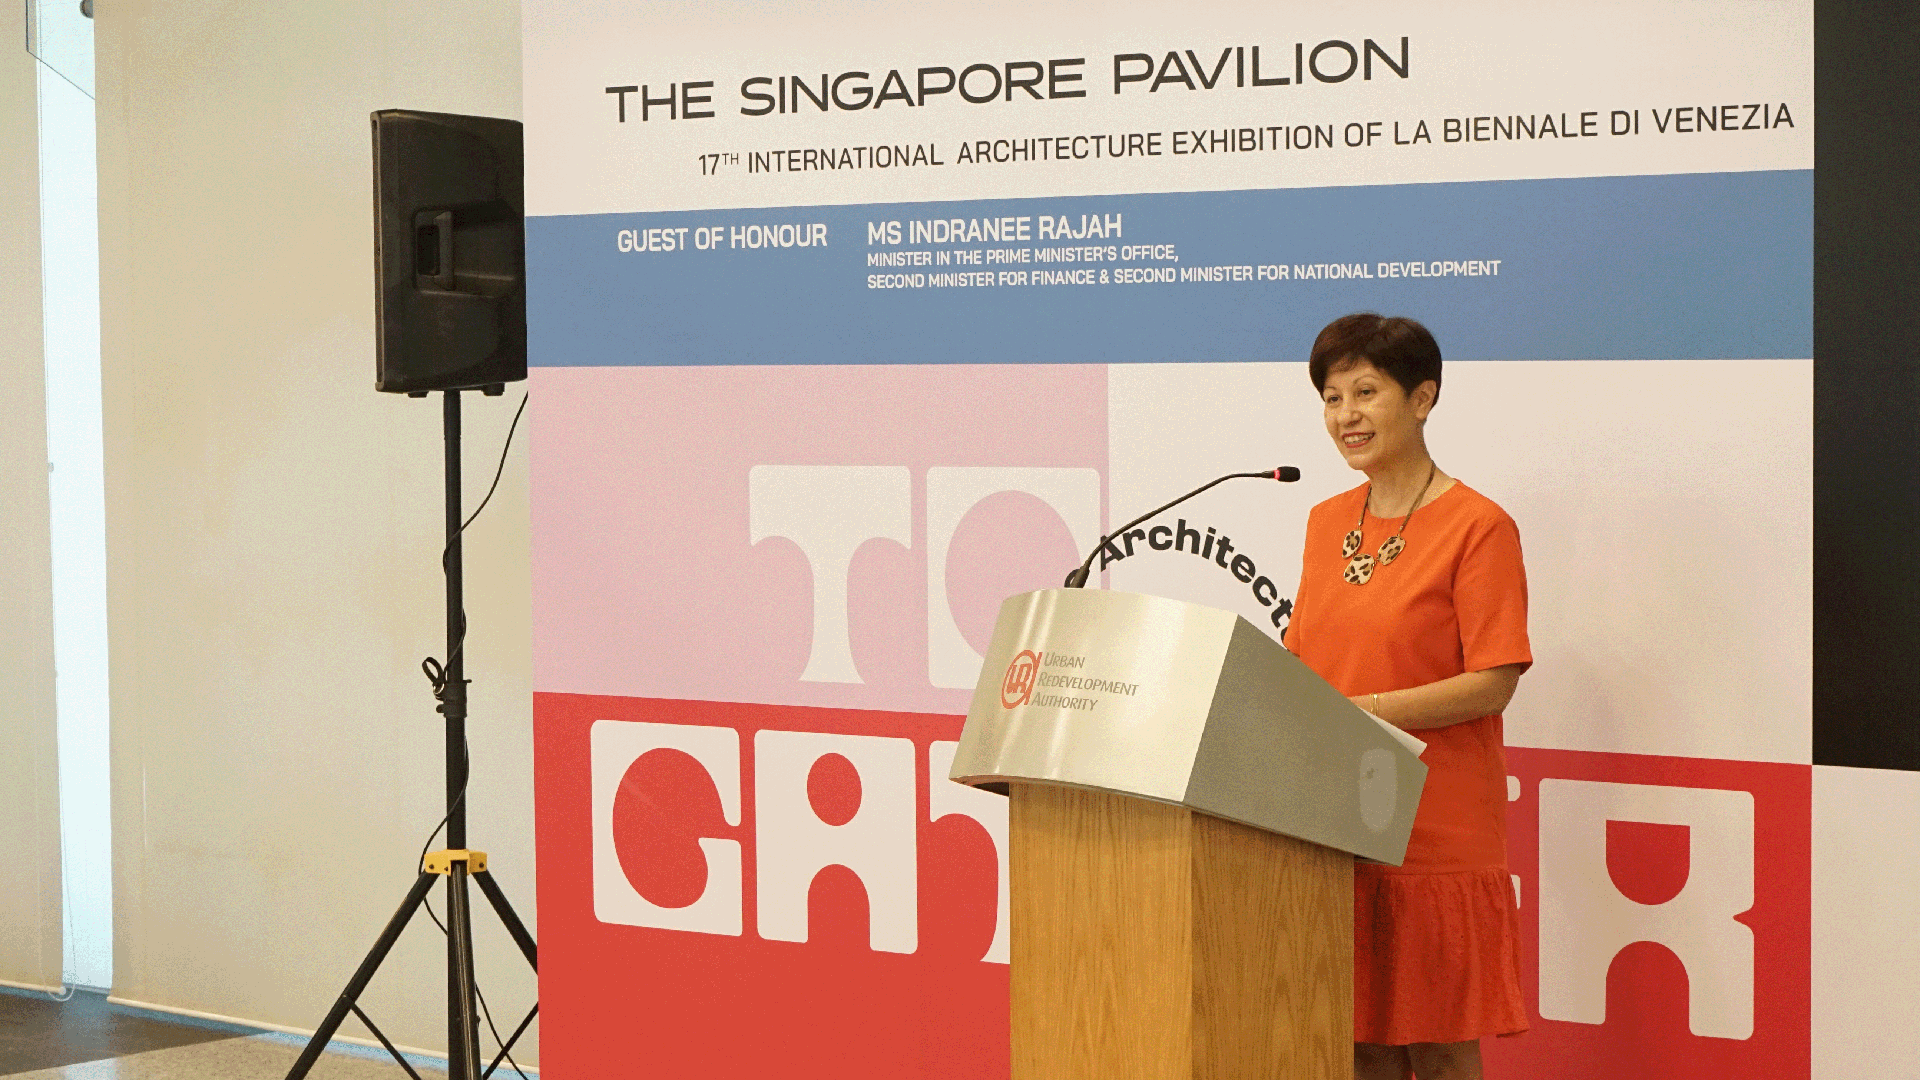 The exhibit officially opened in Singapore by Ms Indranee Rajah, Minister in the Prime Mister’s Office and Second Minister for Finance & National Development.